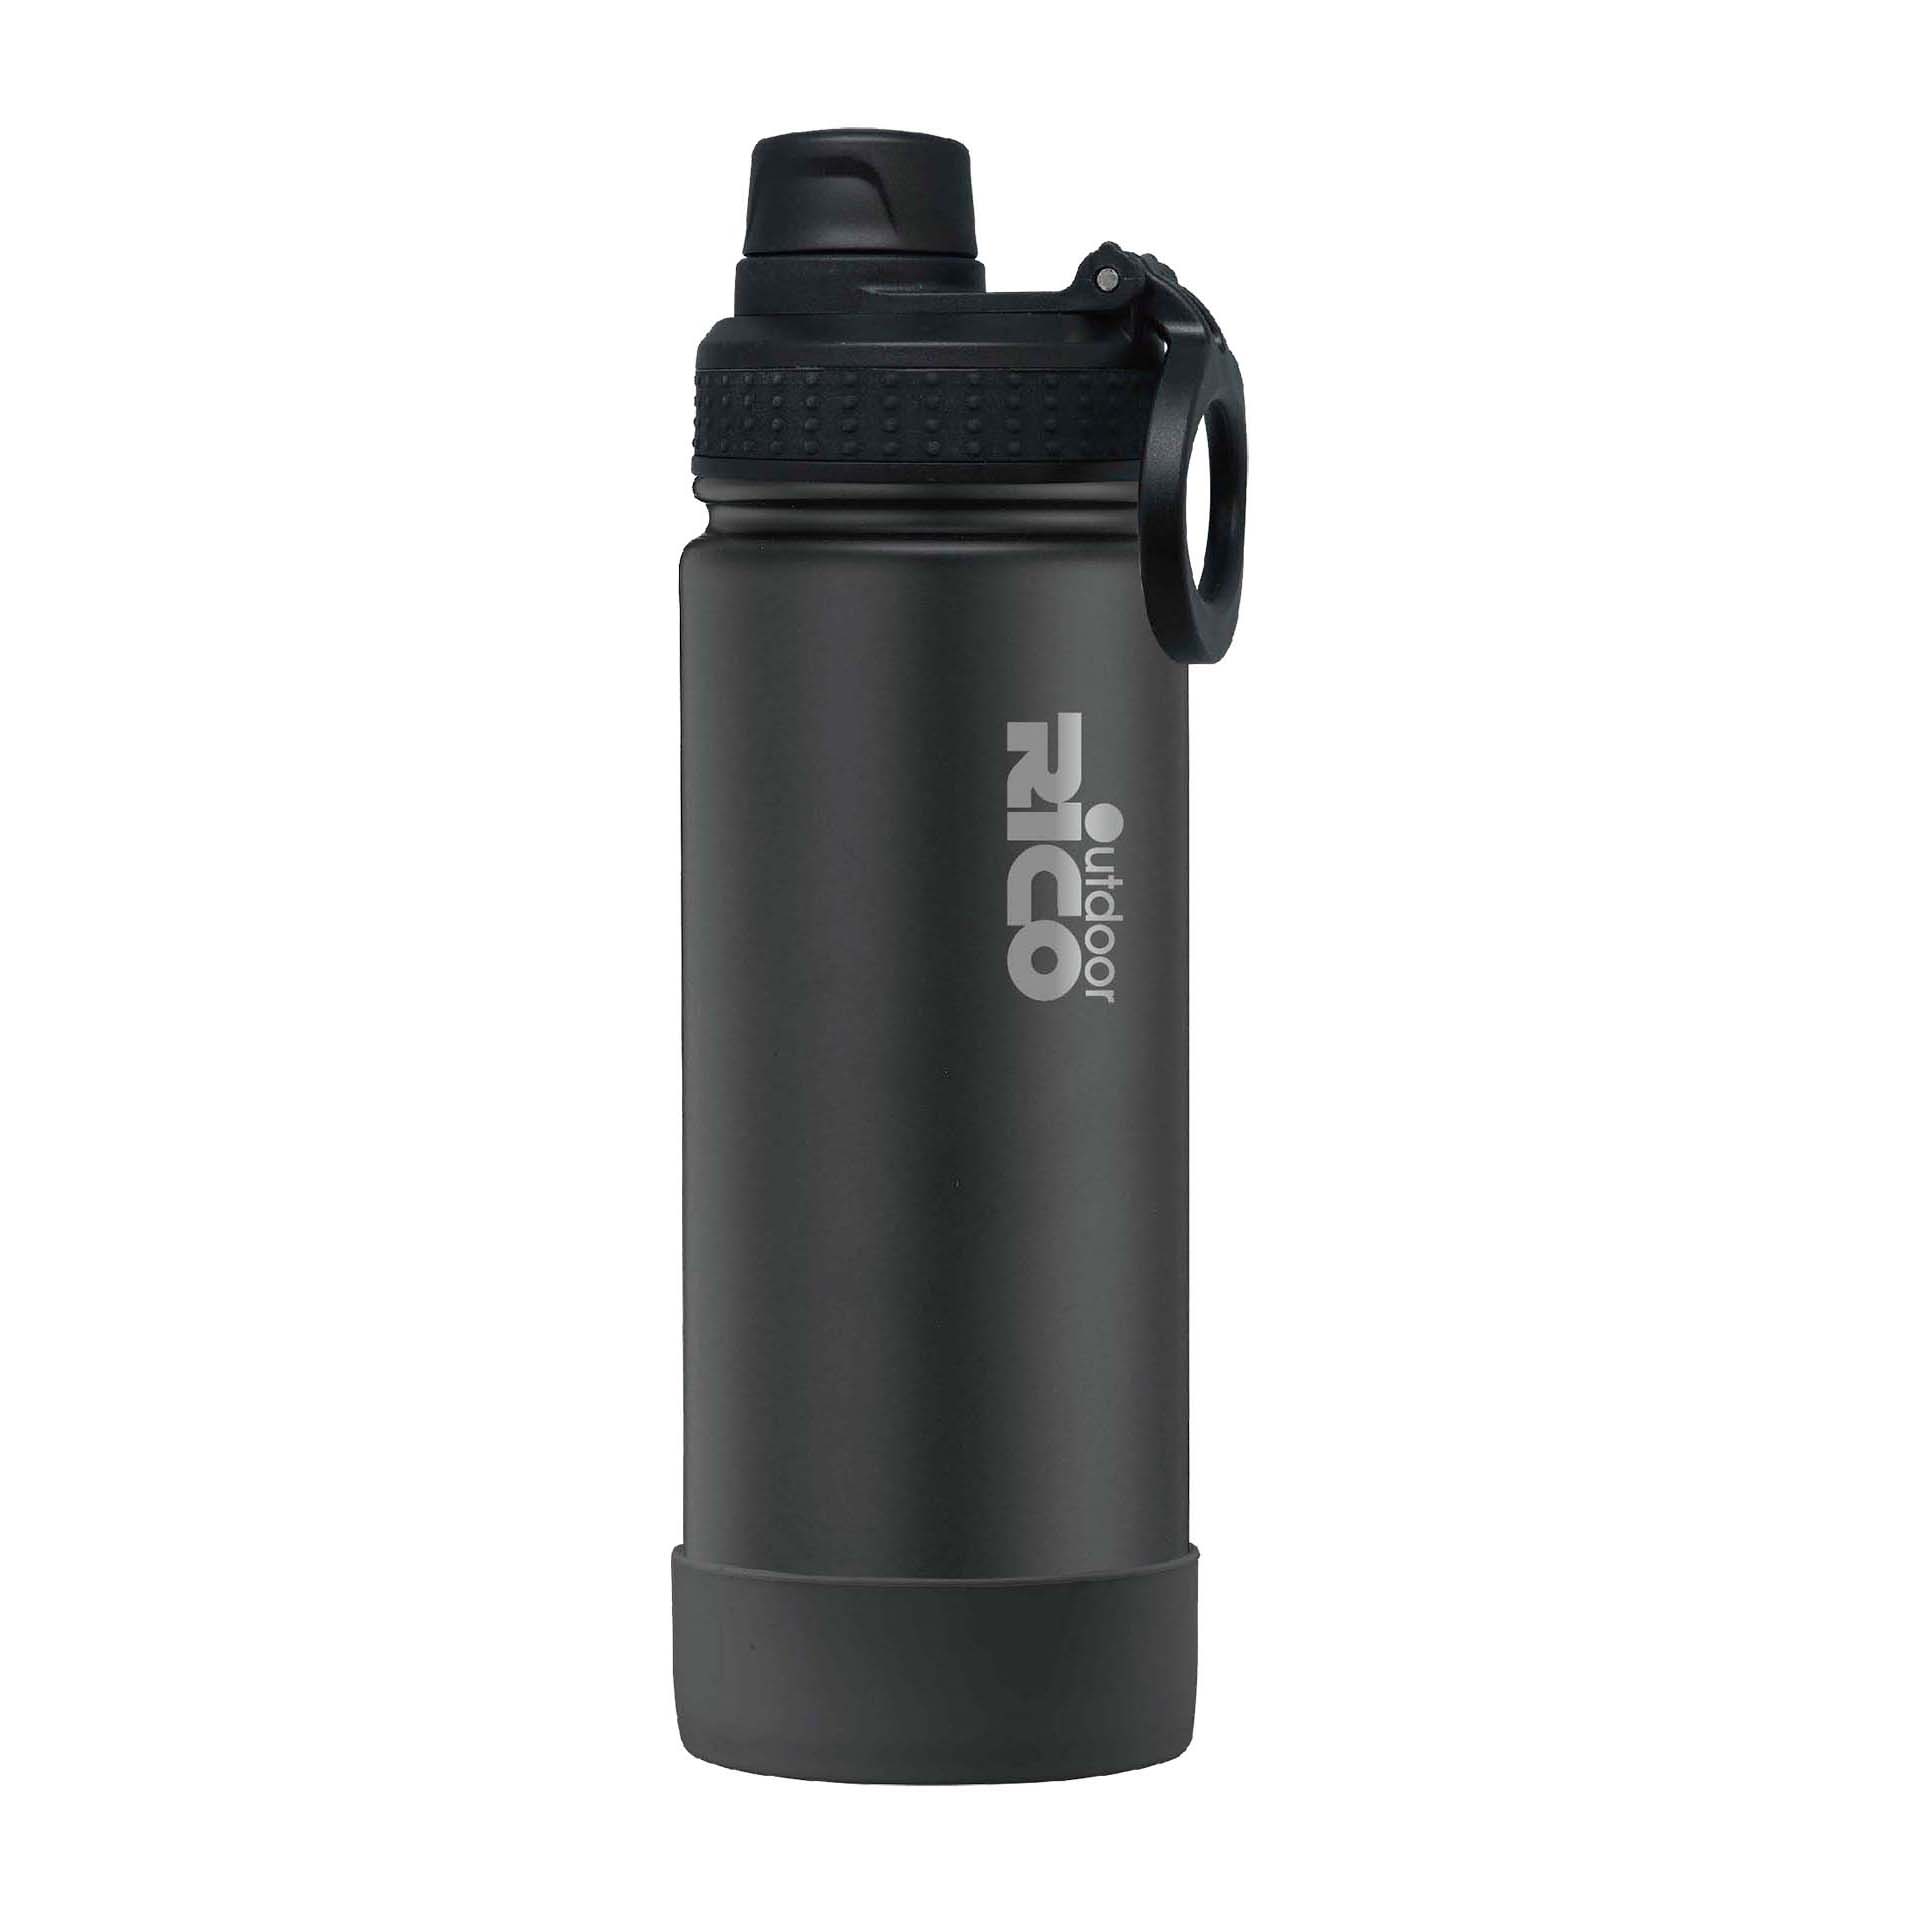 Carry Stainless Steel Vacuum Sports Bottle